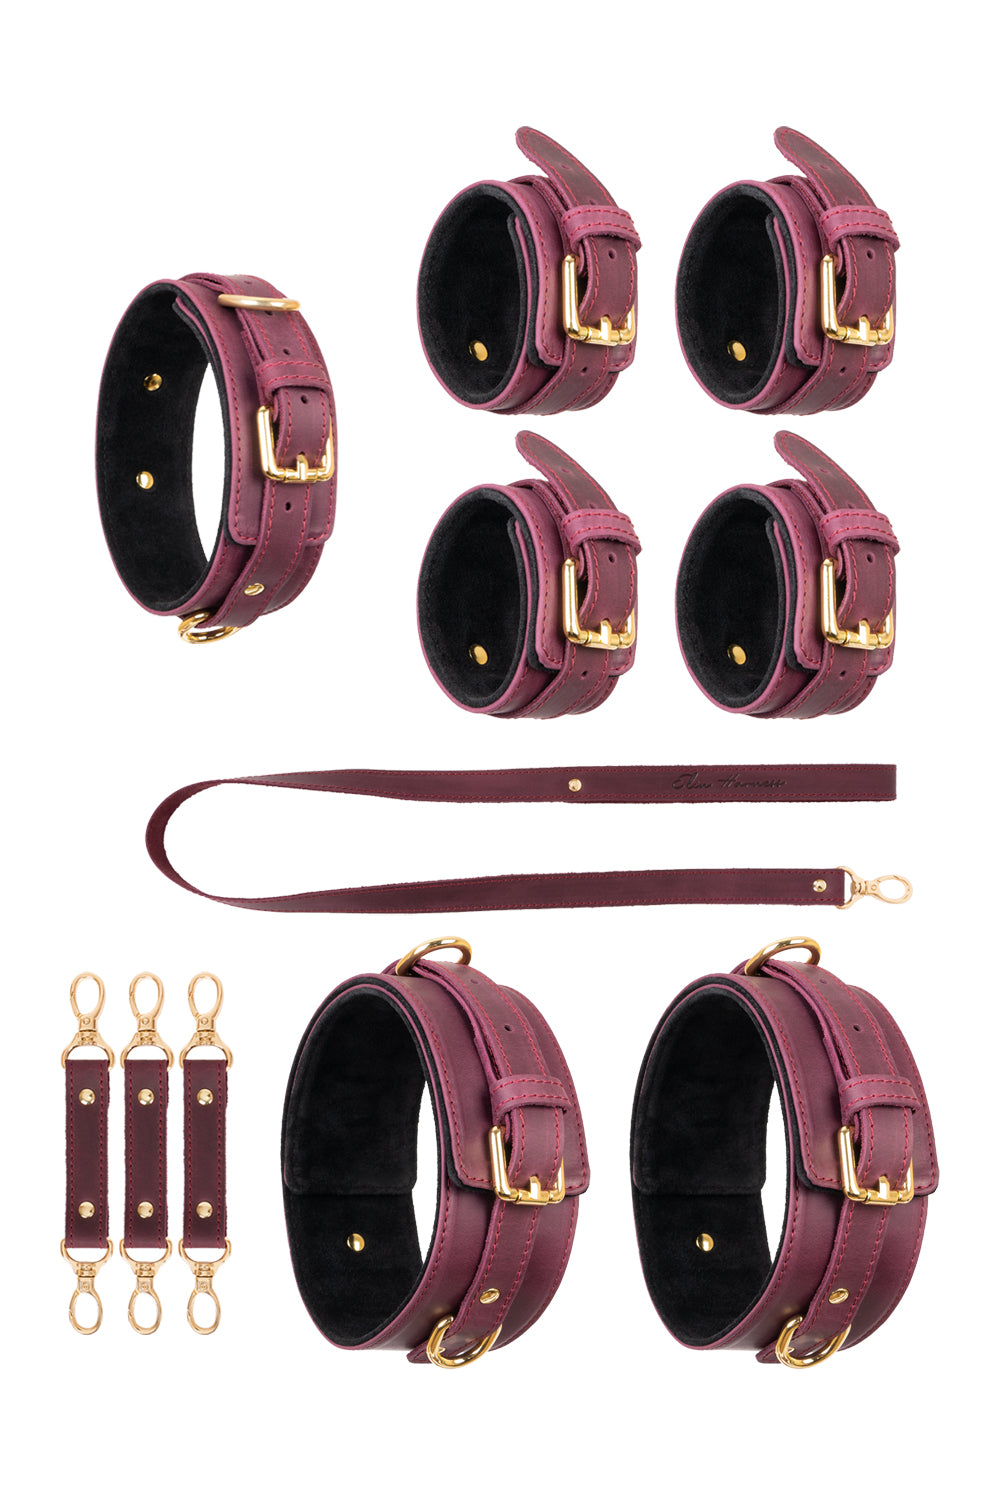 4 in 1 CRAZY HORSE Leather Set. 10 colors